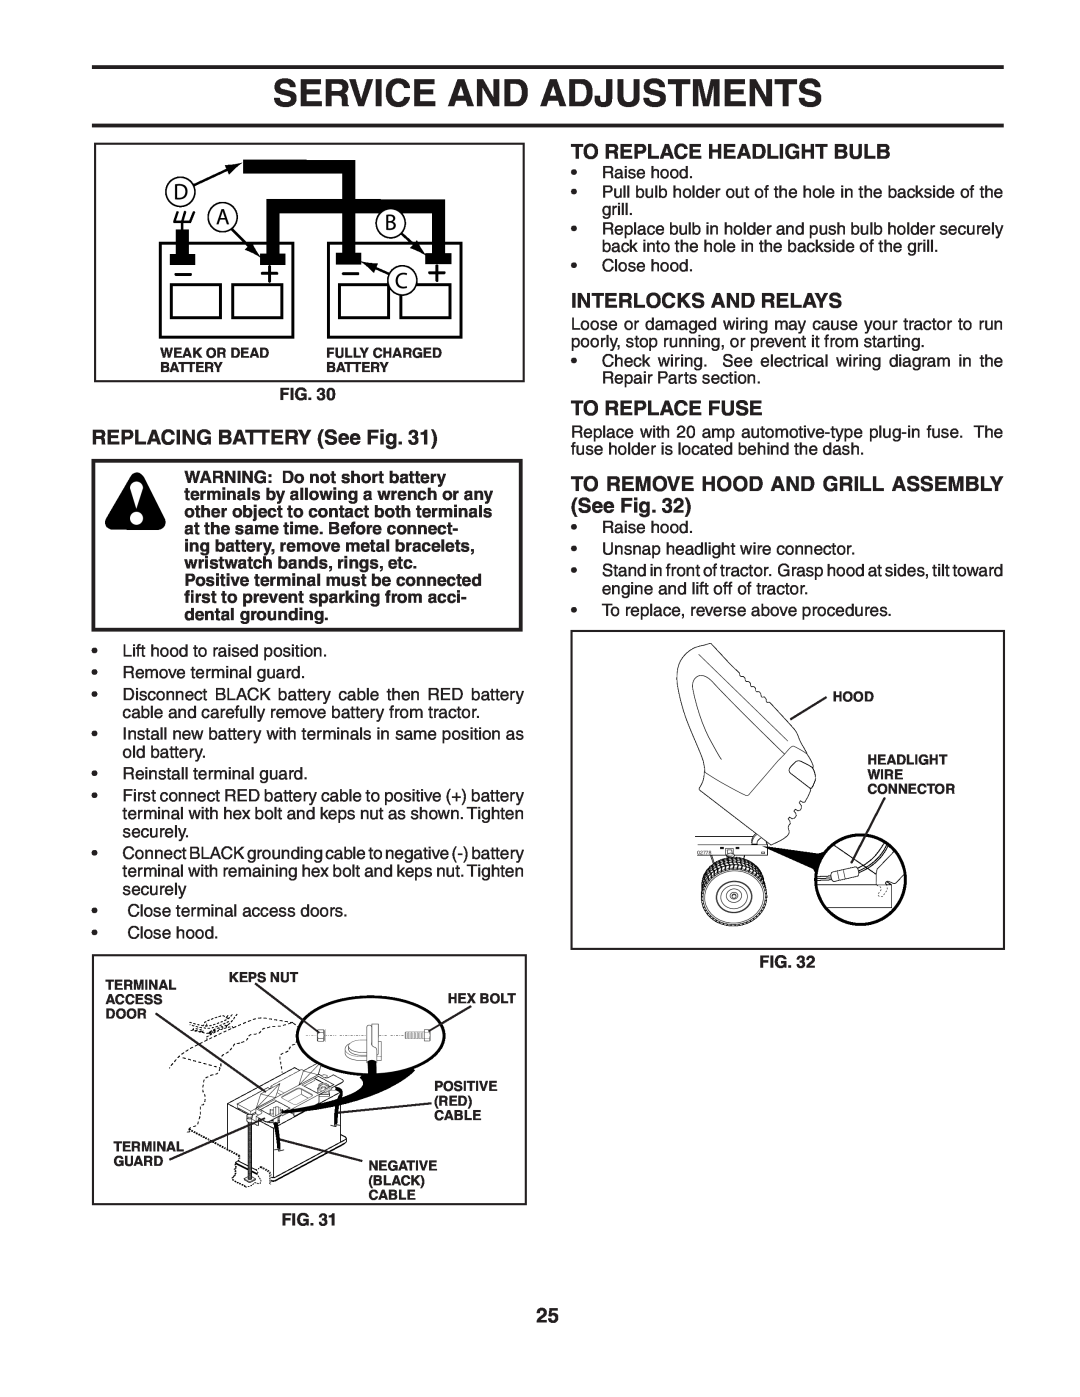 Husqvarna YTH2548 owner manual To Replace Headlight Bulb, Interlocks And Relays, REPLACING BATTERY See Fig, To Replace Fuse 